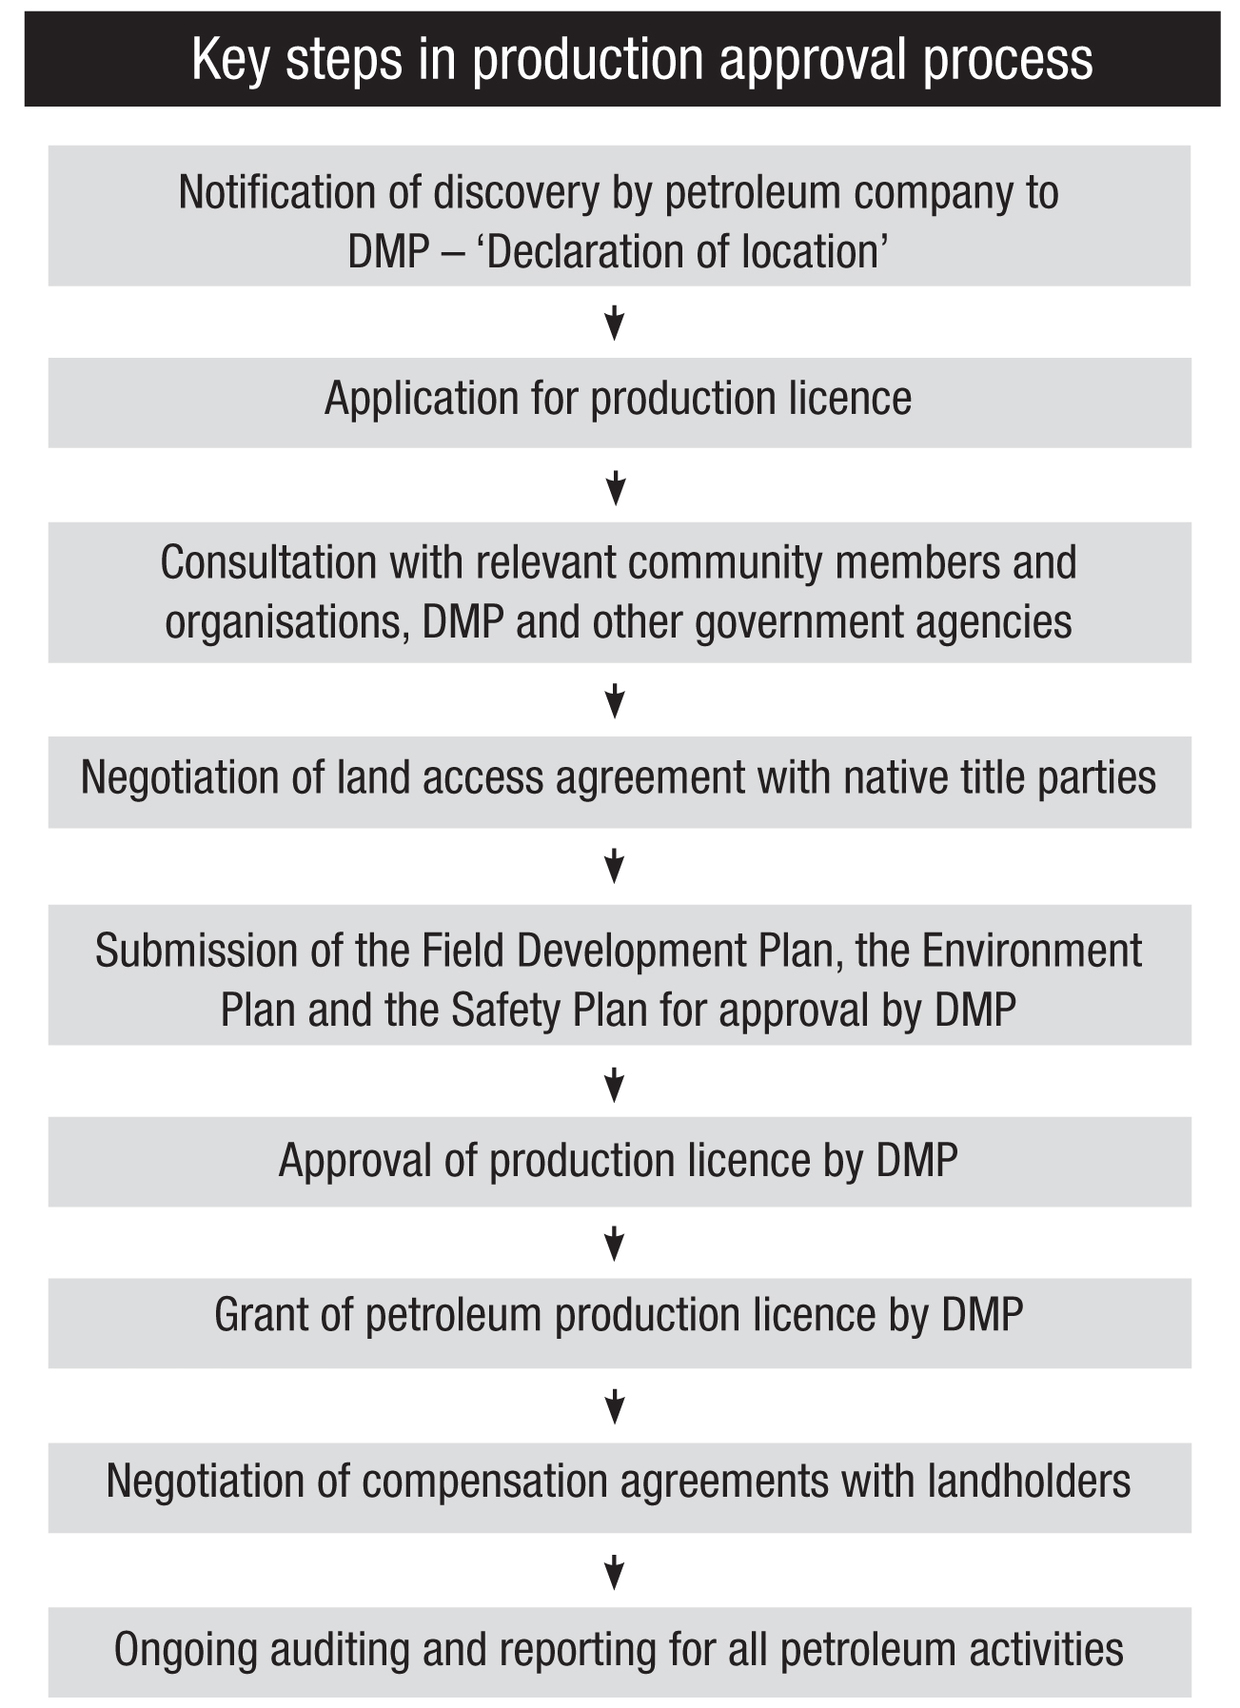 Key steps in production approval process